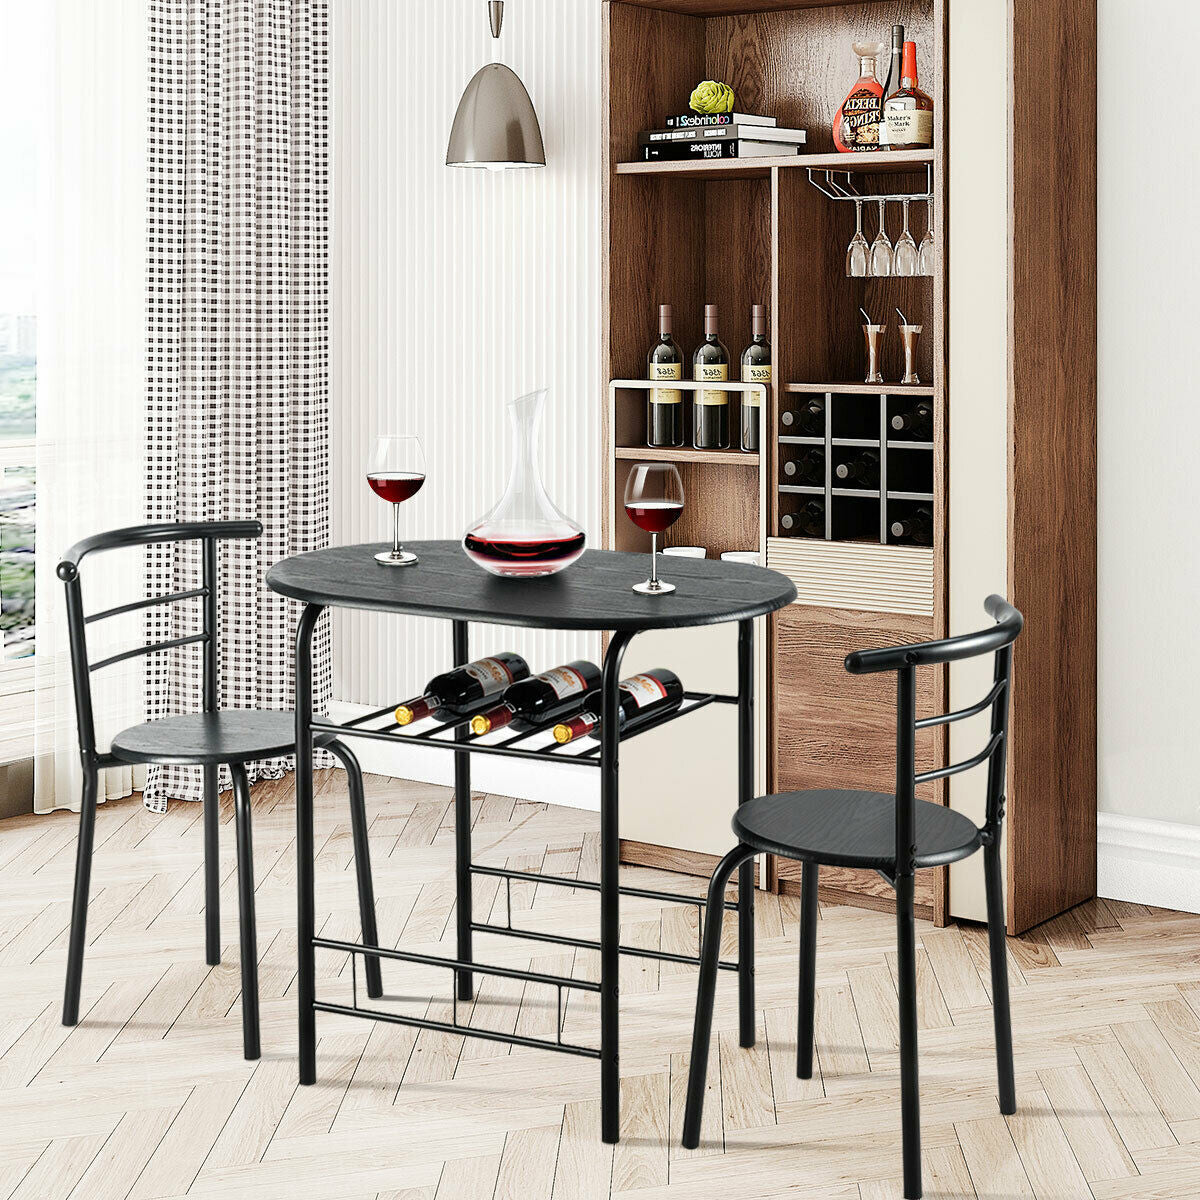 Convenient Wine Storage: The dining table features a built-in wine rack with carefully spaced gaps, providing a perfect place to store your wine bottles within easy reach. Despite the wine rack, there is still ample space under the table to comfortably rest your legs.